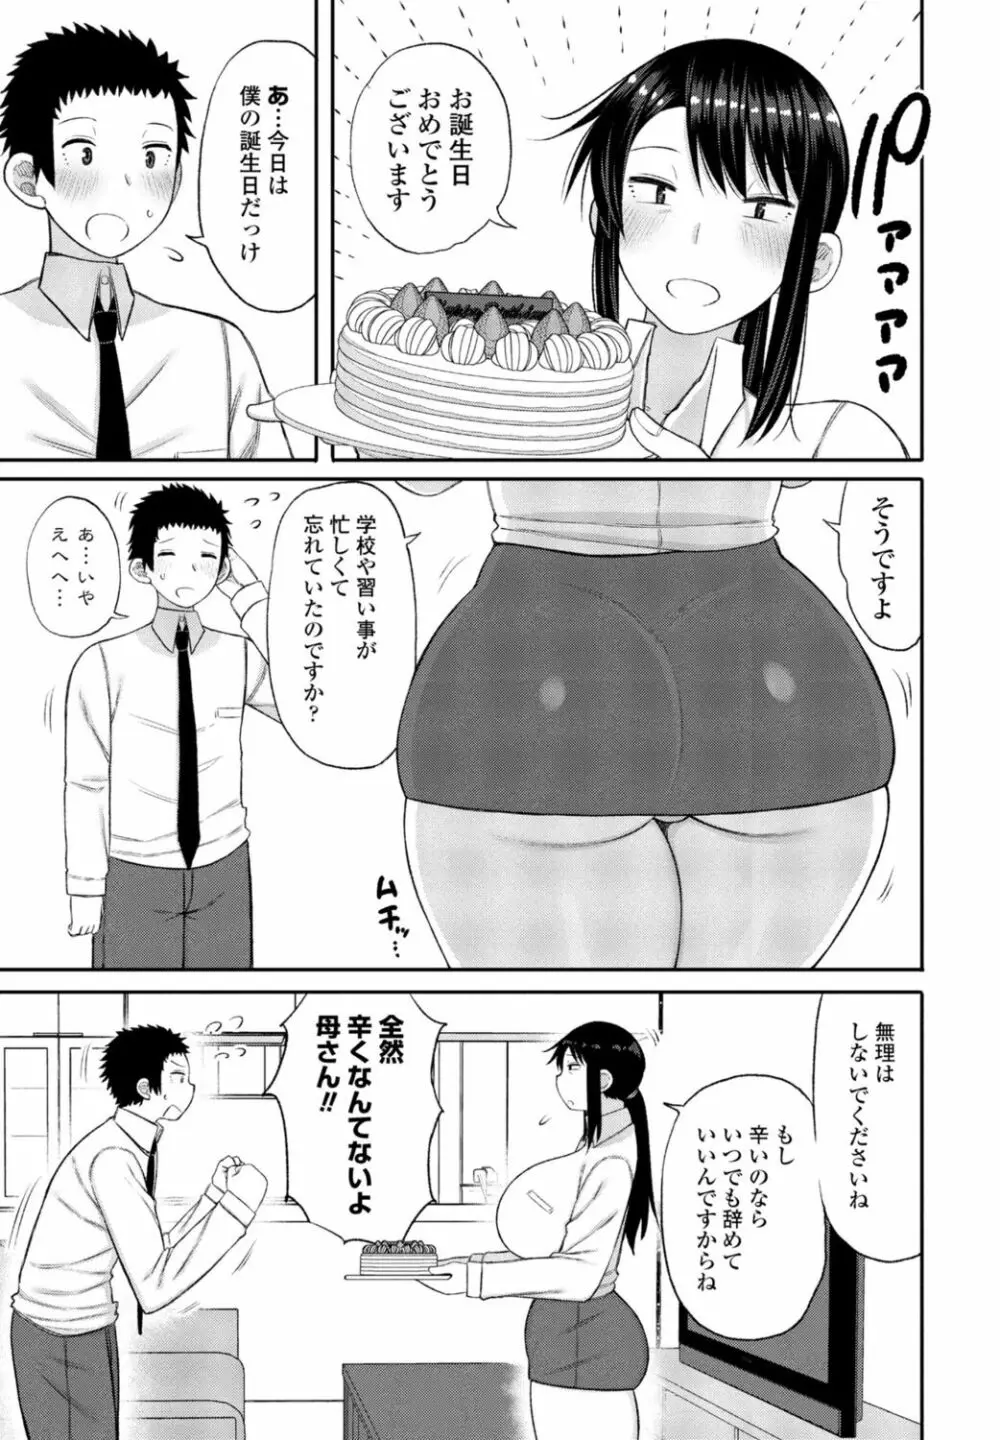 COMIC 桃姫DEEPEST Vol. 1 Page.175